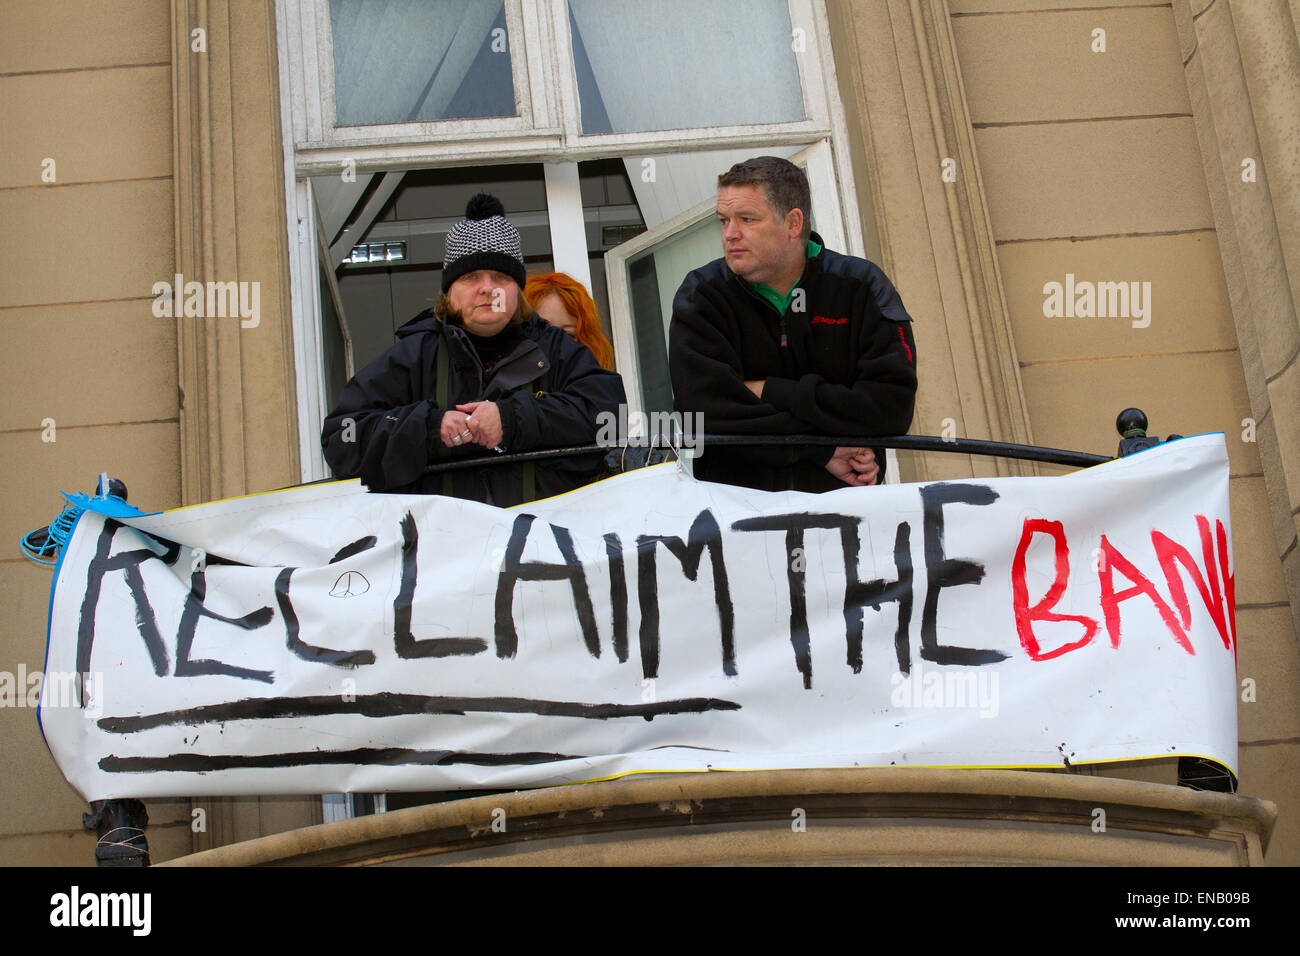 Liverpool, Merseyside, 1st May, 2015. Reclaim the Bank    Love Activists occupying Liverpool bank building in Castle Street vow to lock themselves in the vault if bailiffs try to evict them. In new tactics today Merseyside Police issue Dispersion Orders to sympathisers providing food and water to the occupiers of the old Bank. Love Activists are resisting a planned eviction from a historic former Liverpool city centre building which they turned into an illegal homeless shelter.  Credit:  Mar Photographics/Alamy Live News Stock Photo